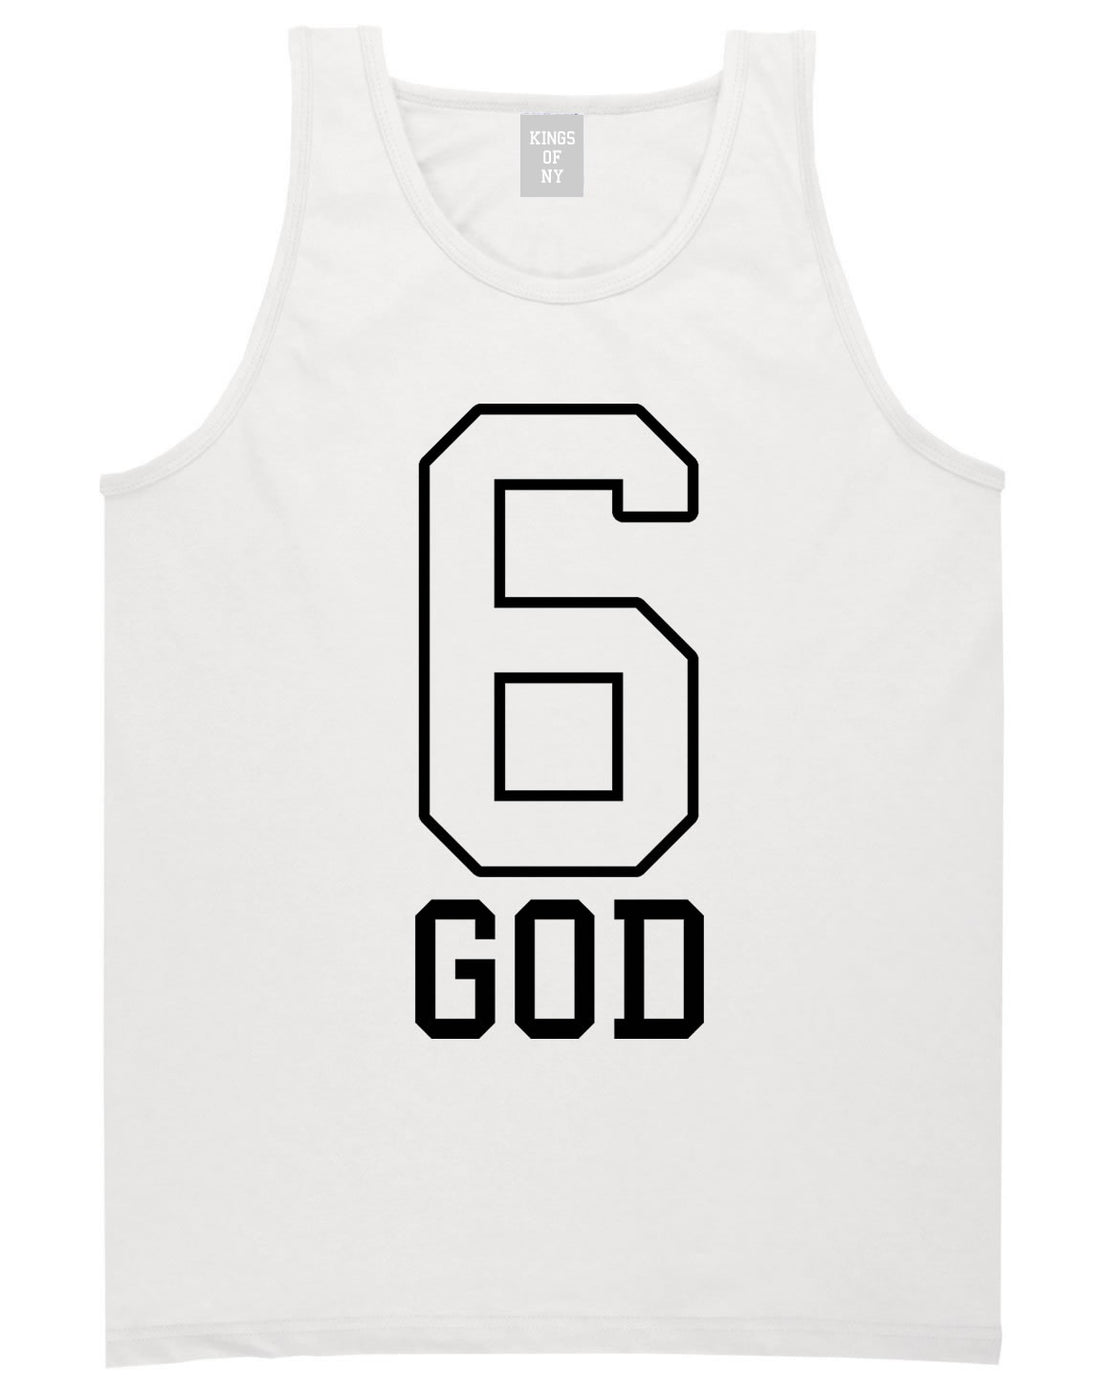 Six 6 God Tank Top in White By Kings Of NY